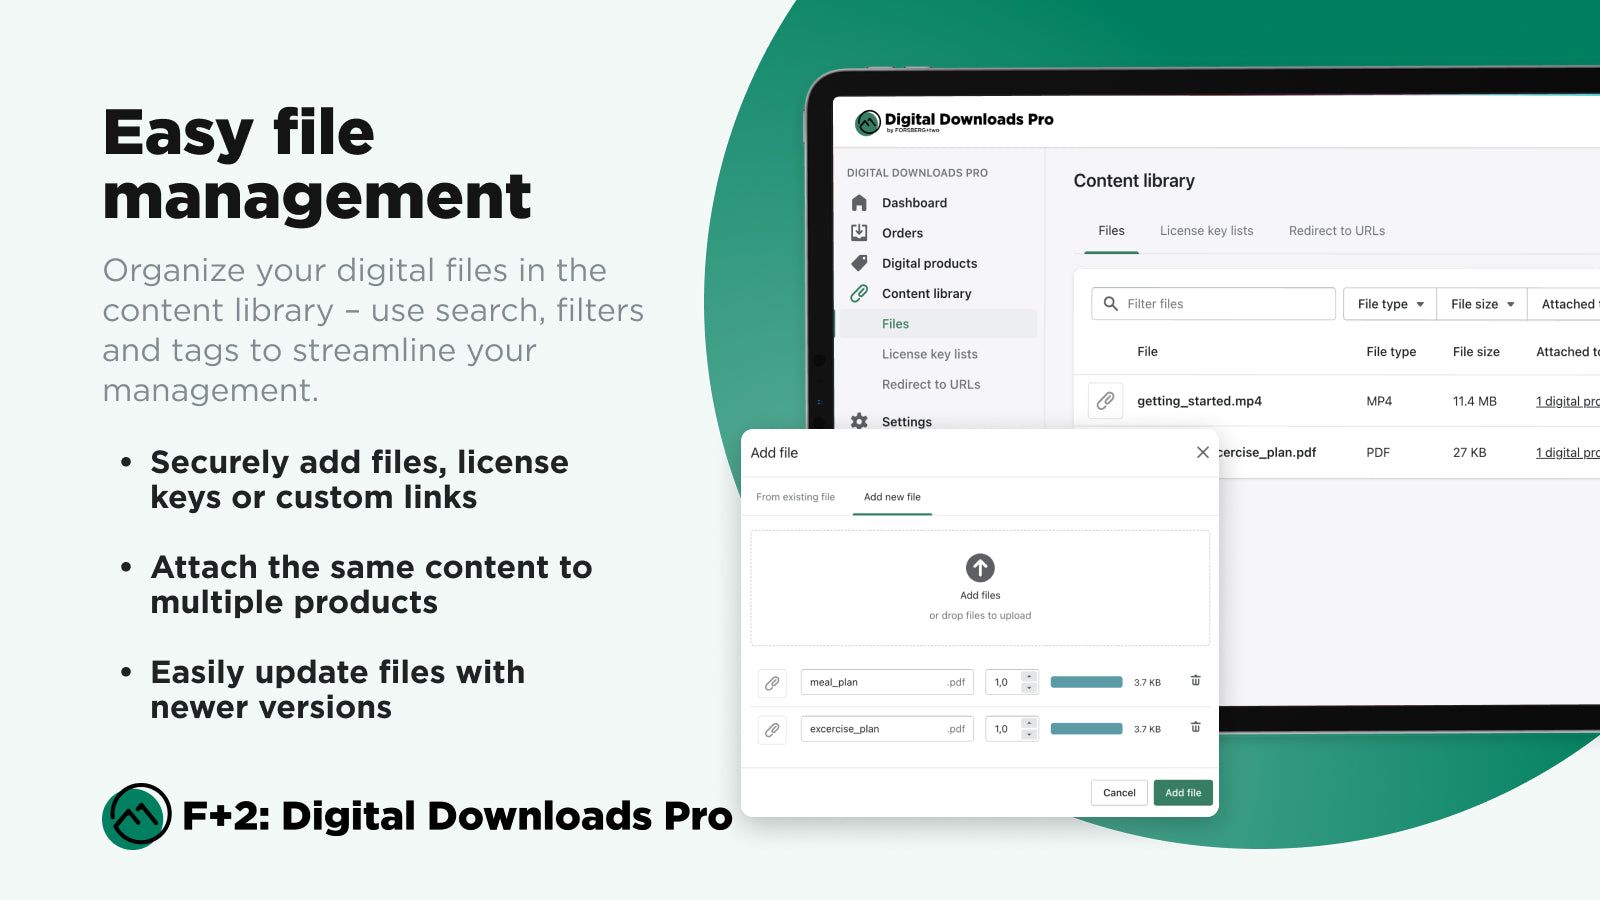 Organize your digital files in the content library